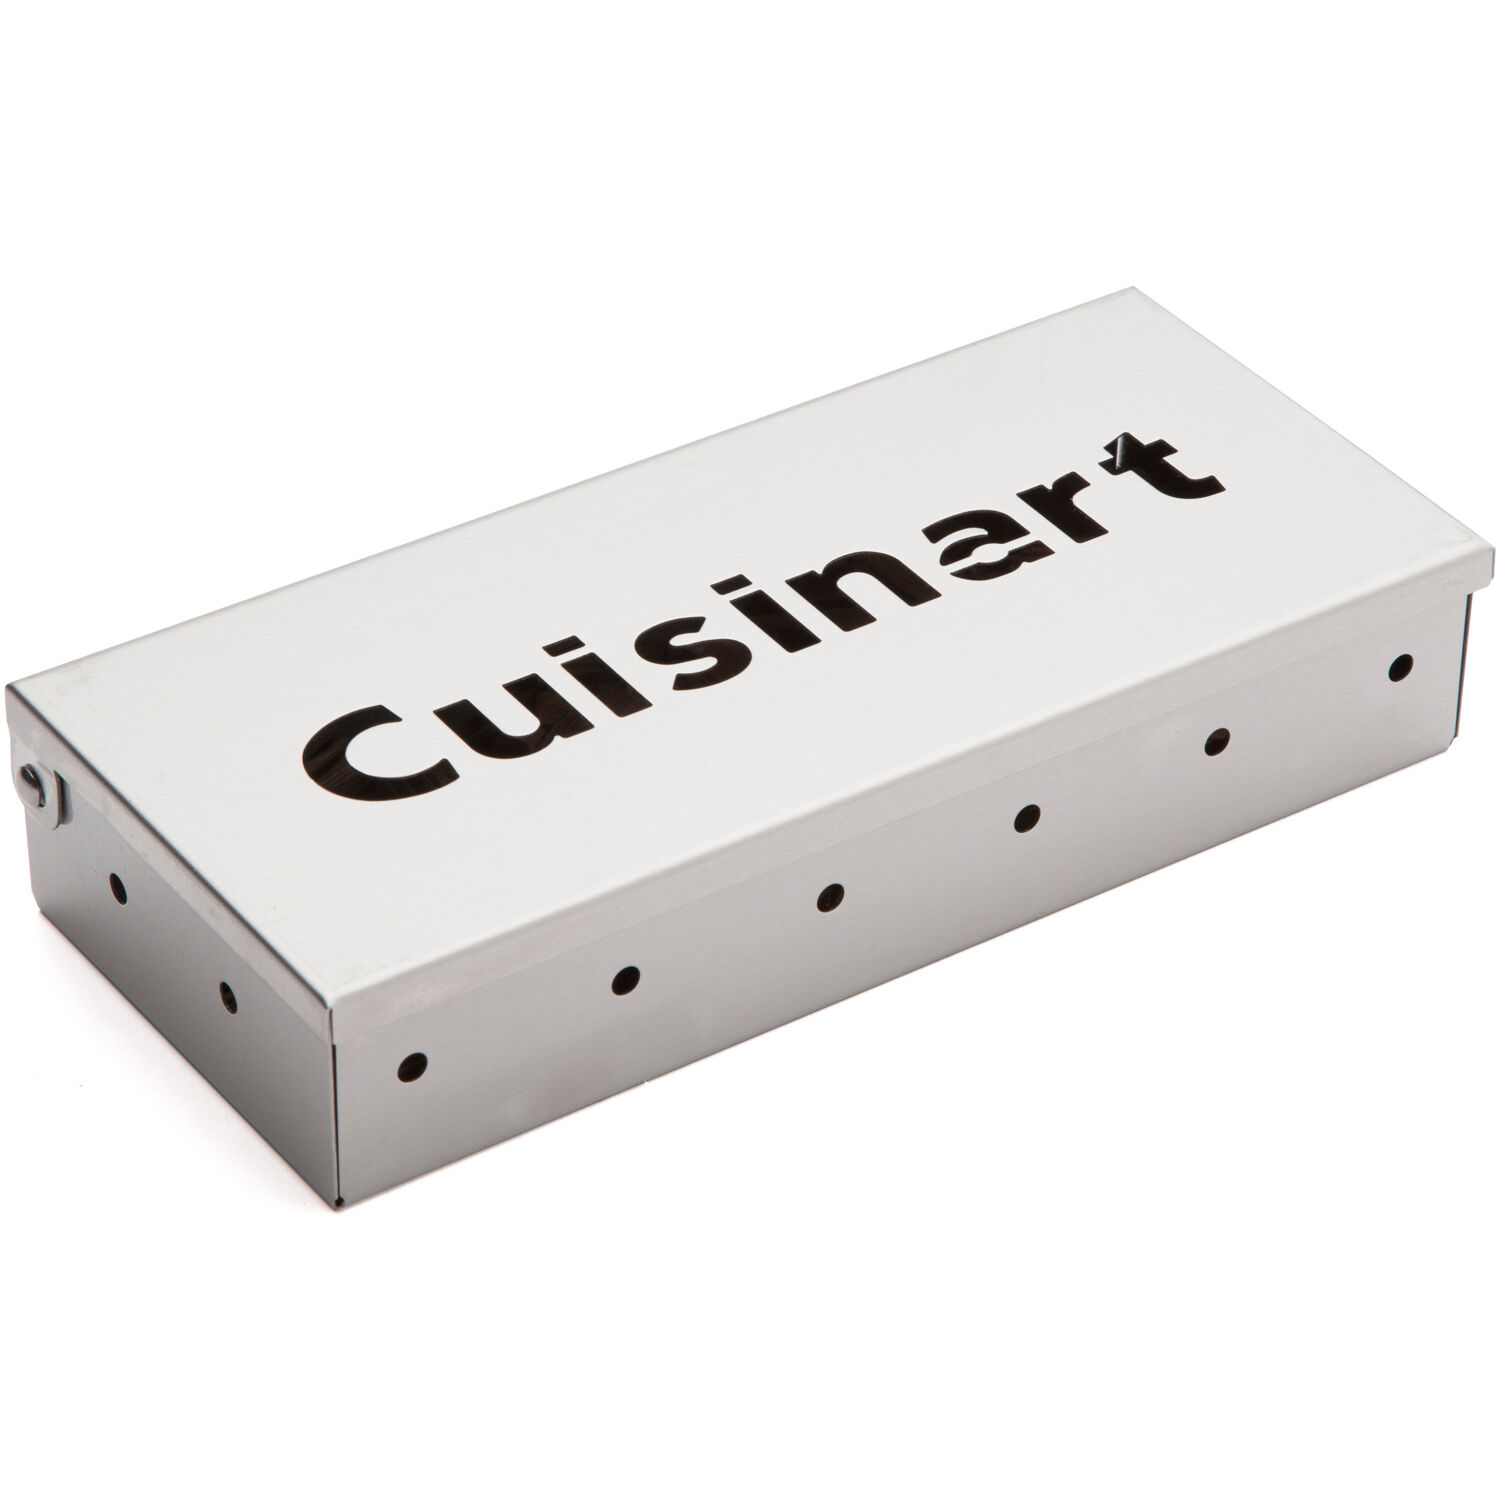 Cuisinart Wood Chip Smoker Box in Stainless Steel - image 2 of 8